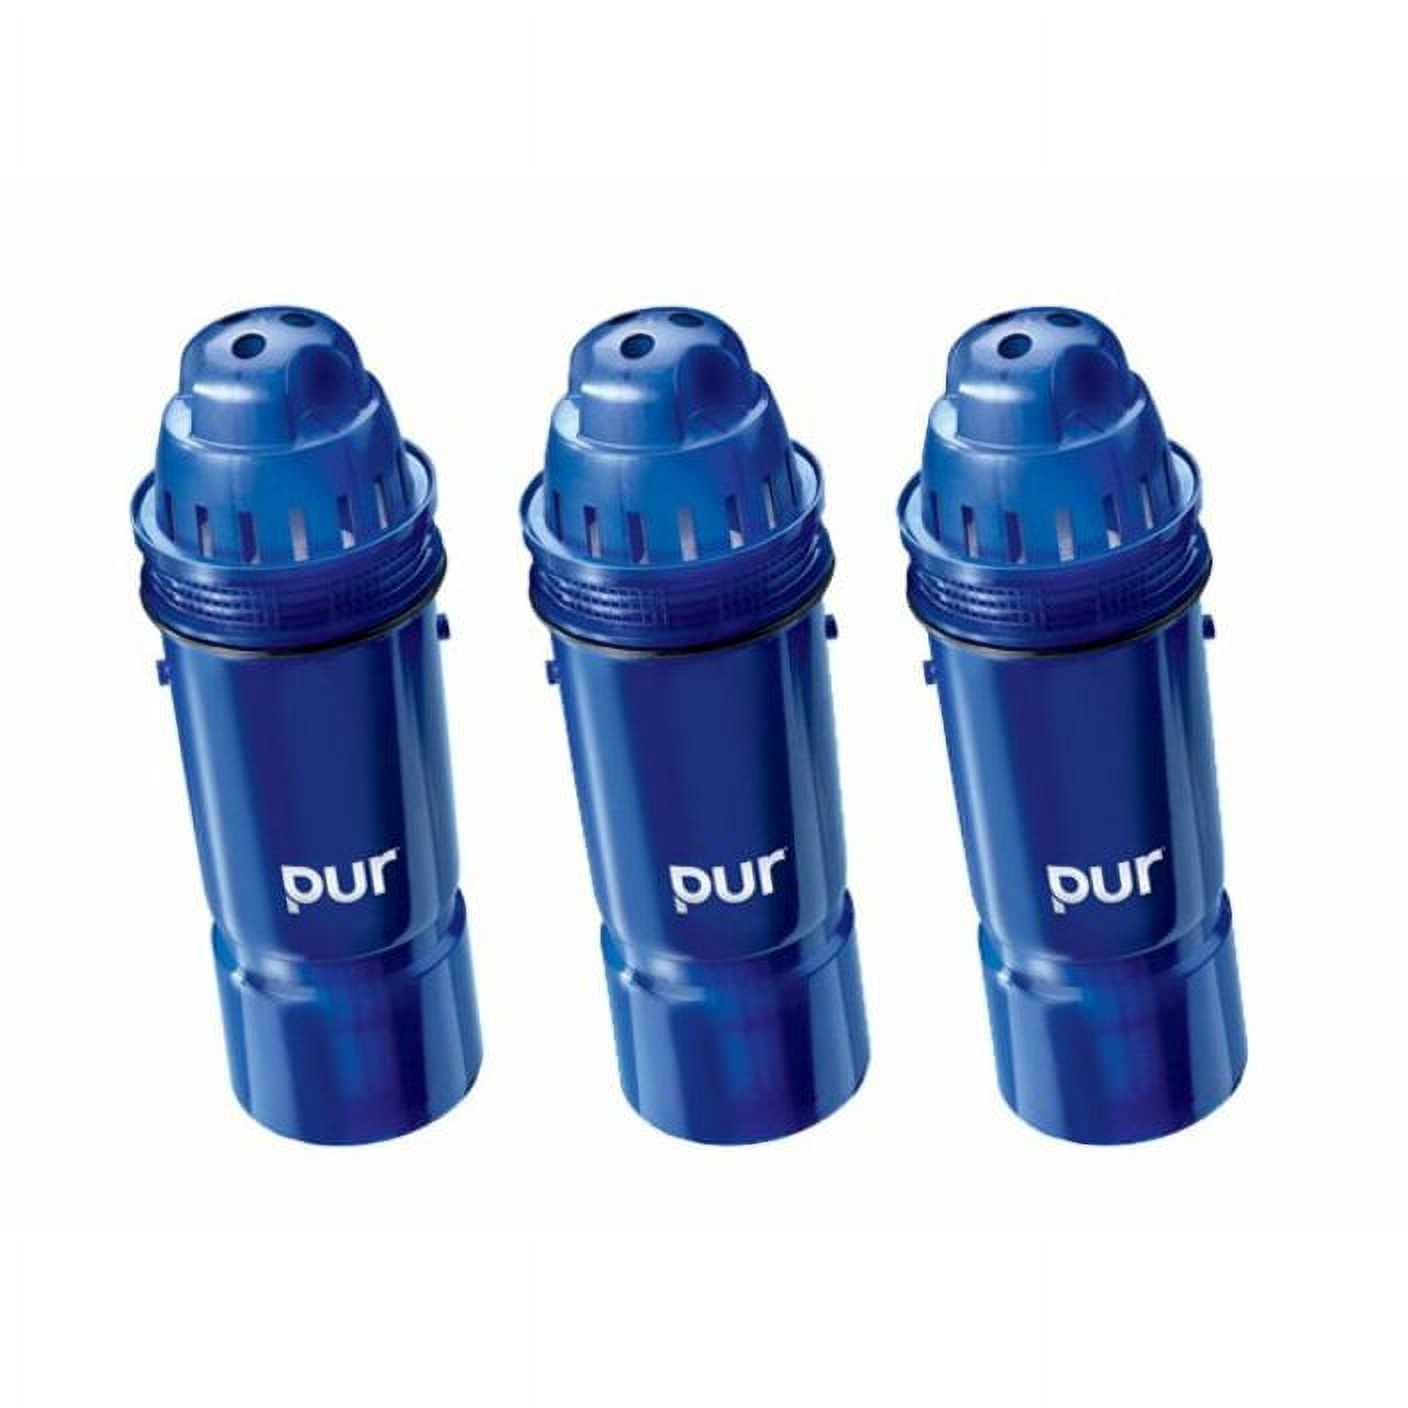 PUR Pitcher Replacement Water Filter, 3-Pack, CRF950Z3 - image 2 of 2